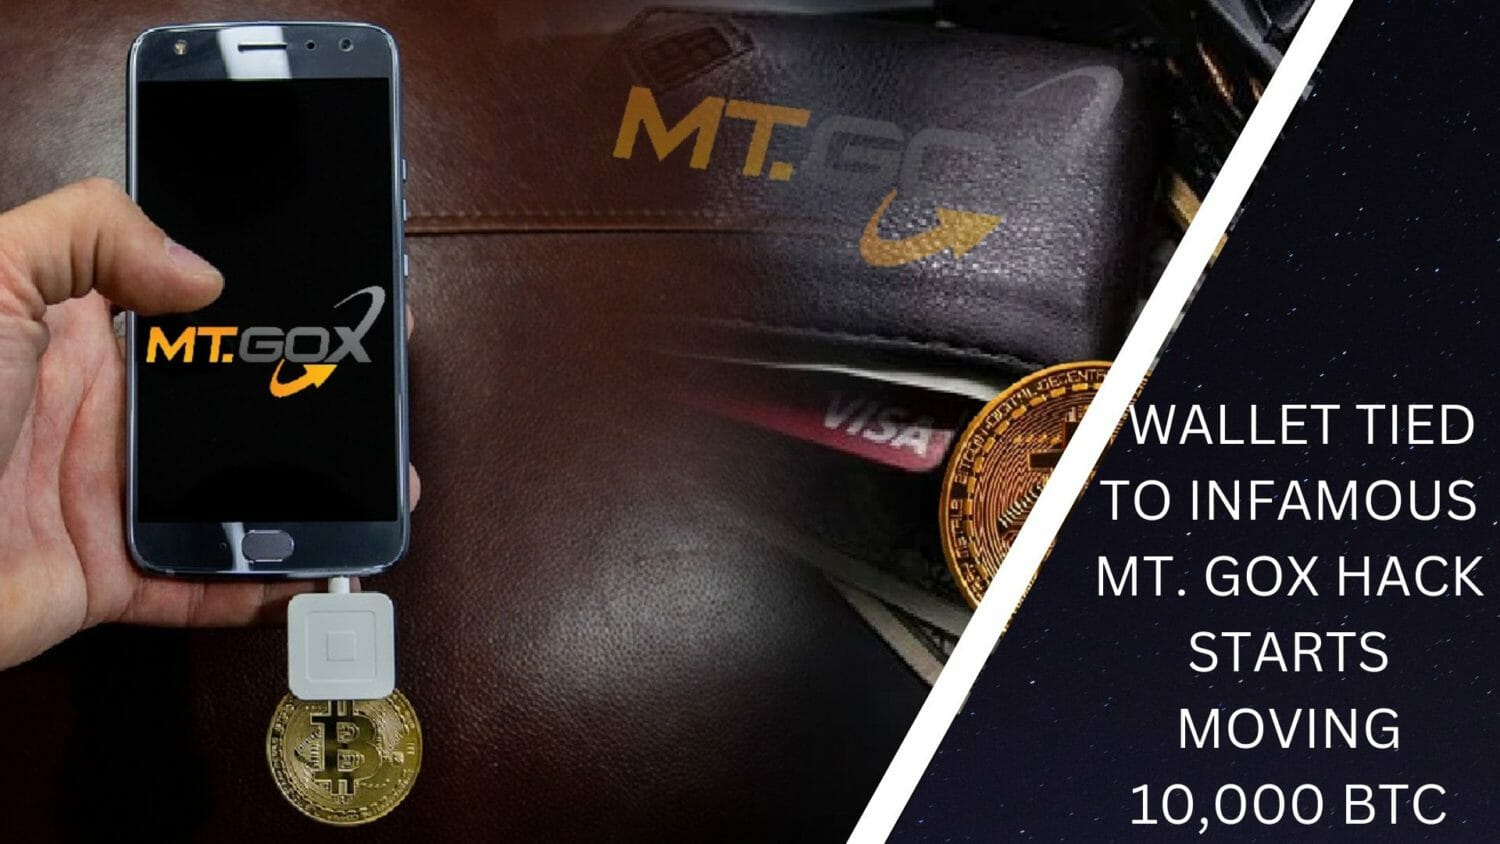 Wallet Tied To Infamous Mt. Gox Hack Starts Moving 10,000 Btc